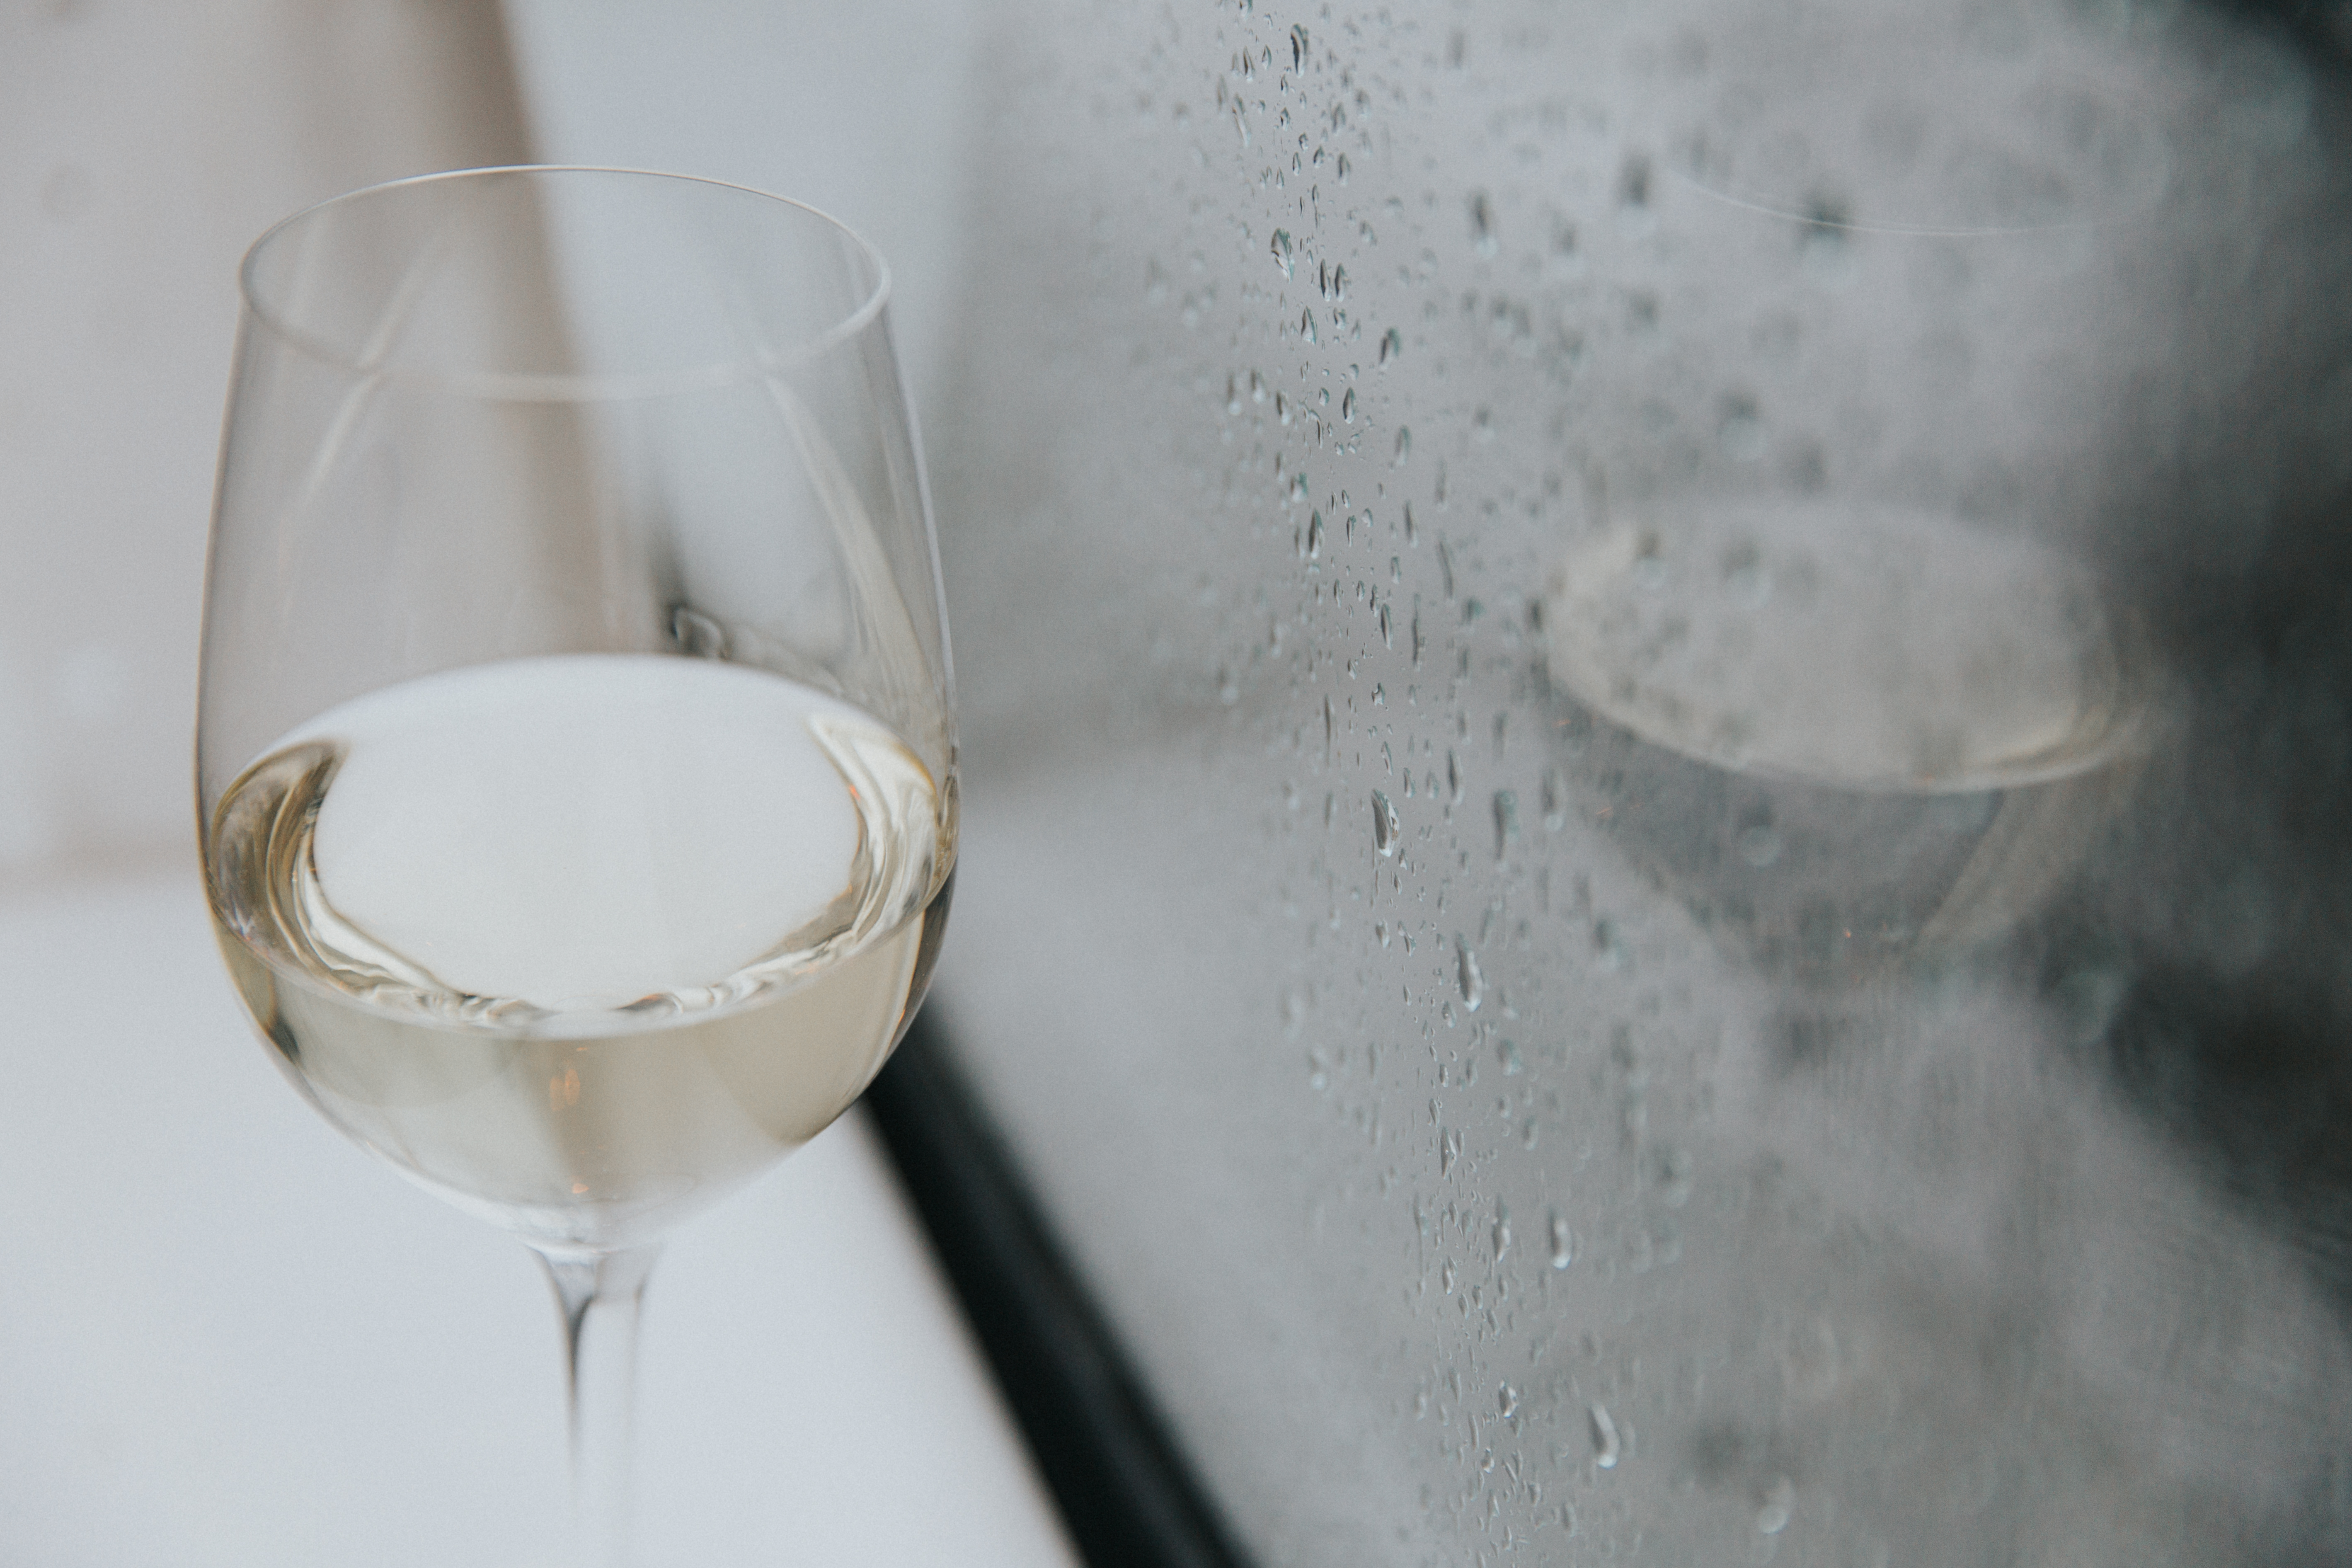 Glass of white wine in front of a rainy window